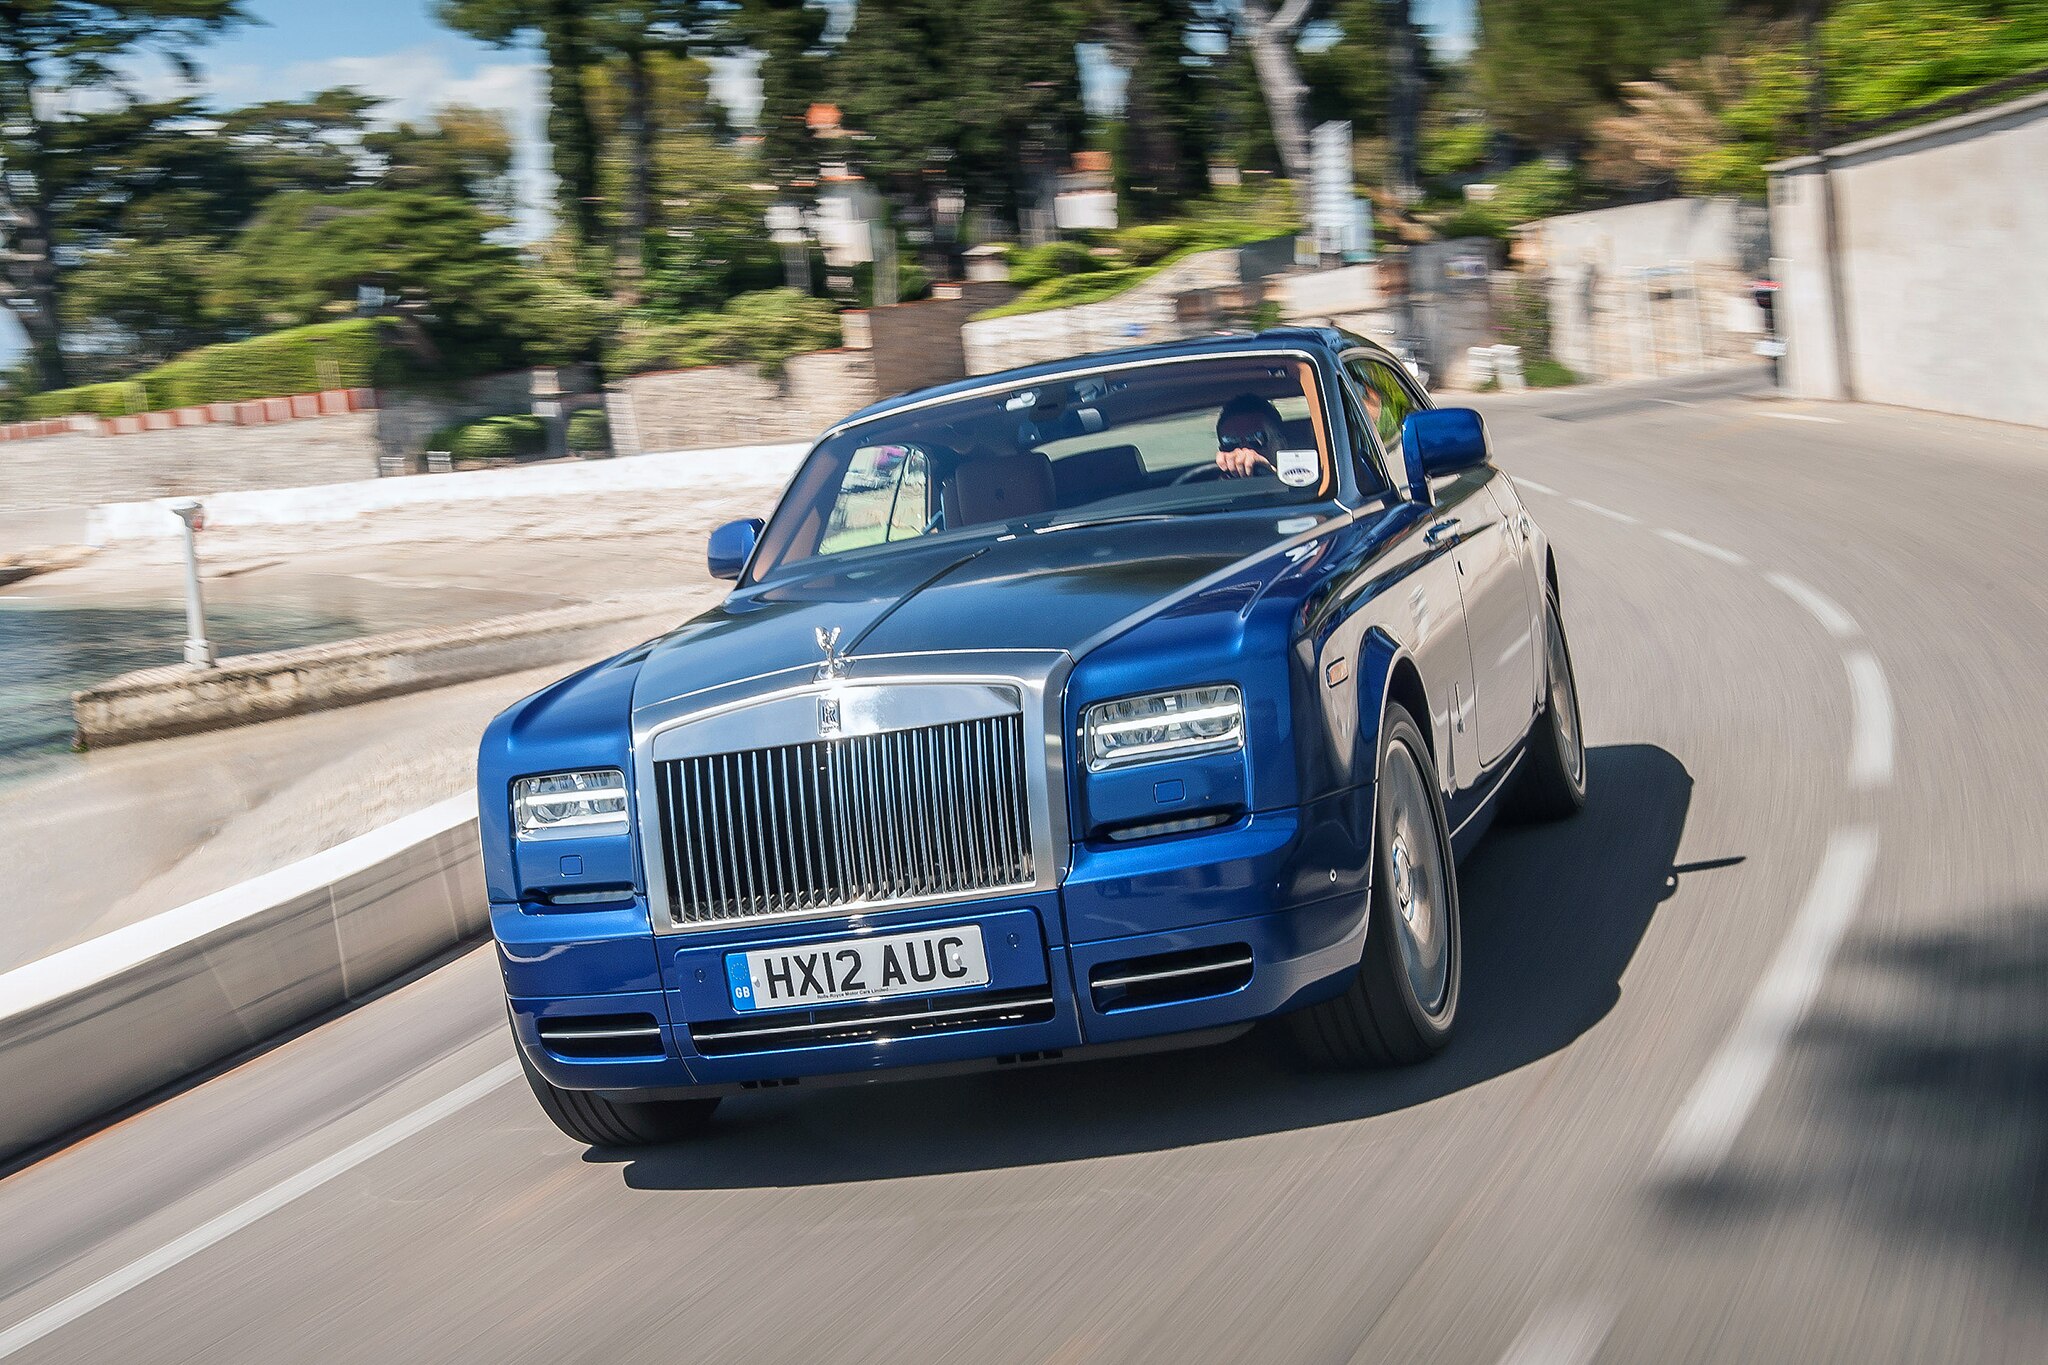 General 2048x1365 car Rolls-Royce luxury cars British cars frontal view licence plates road driving vehicle sunlight motion blur